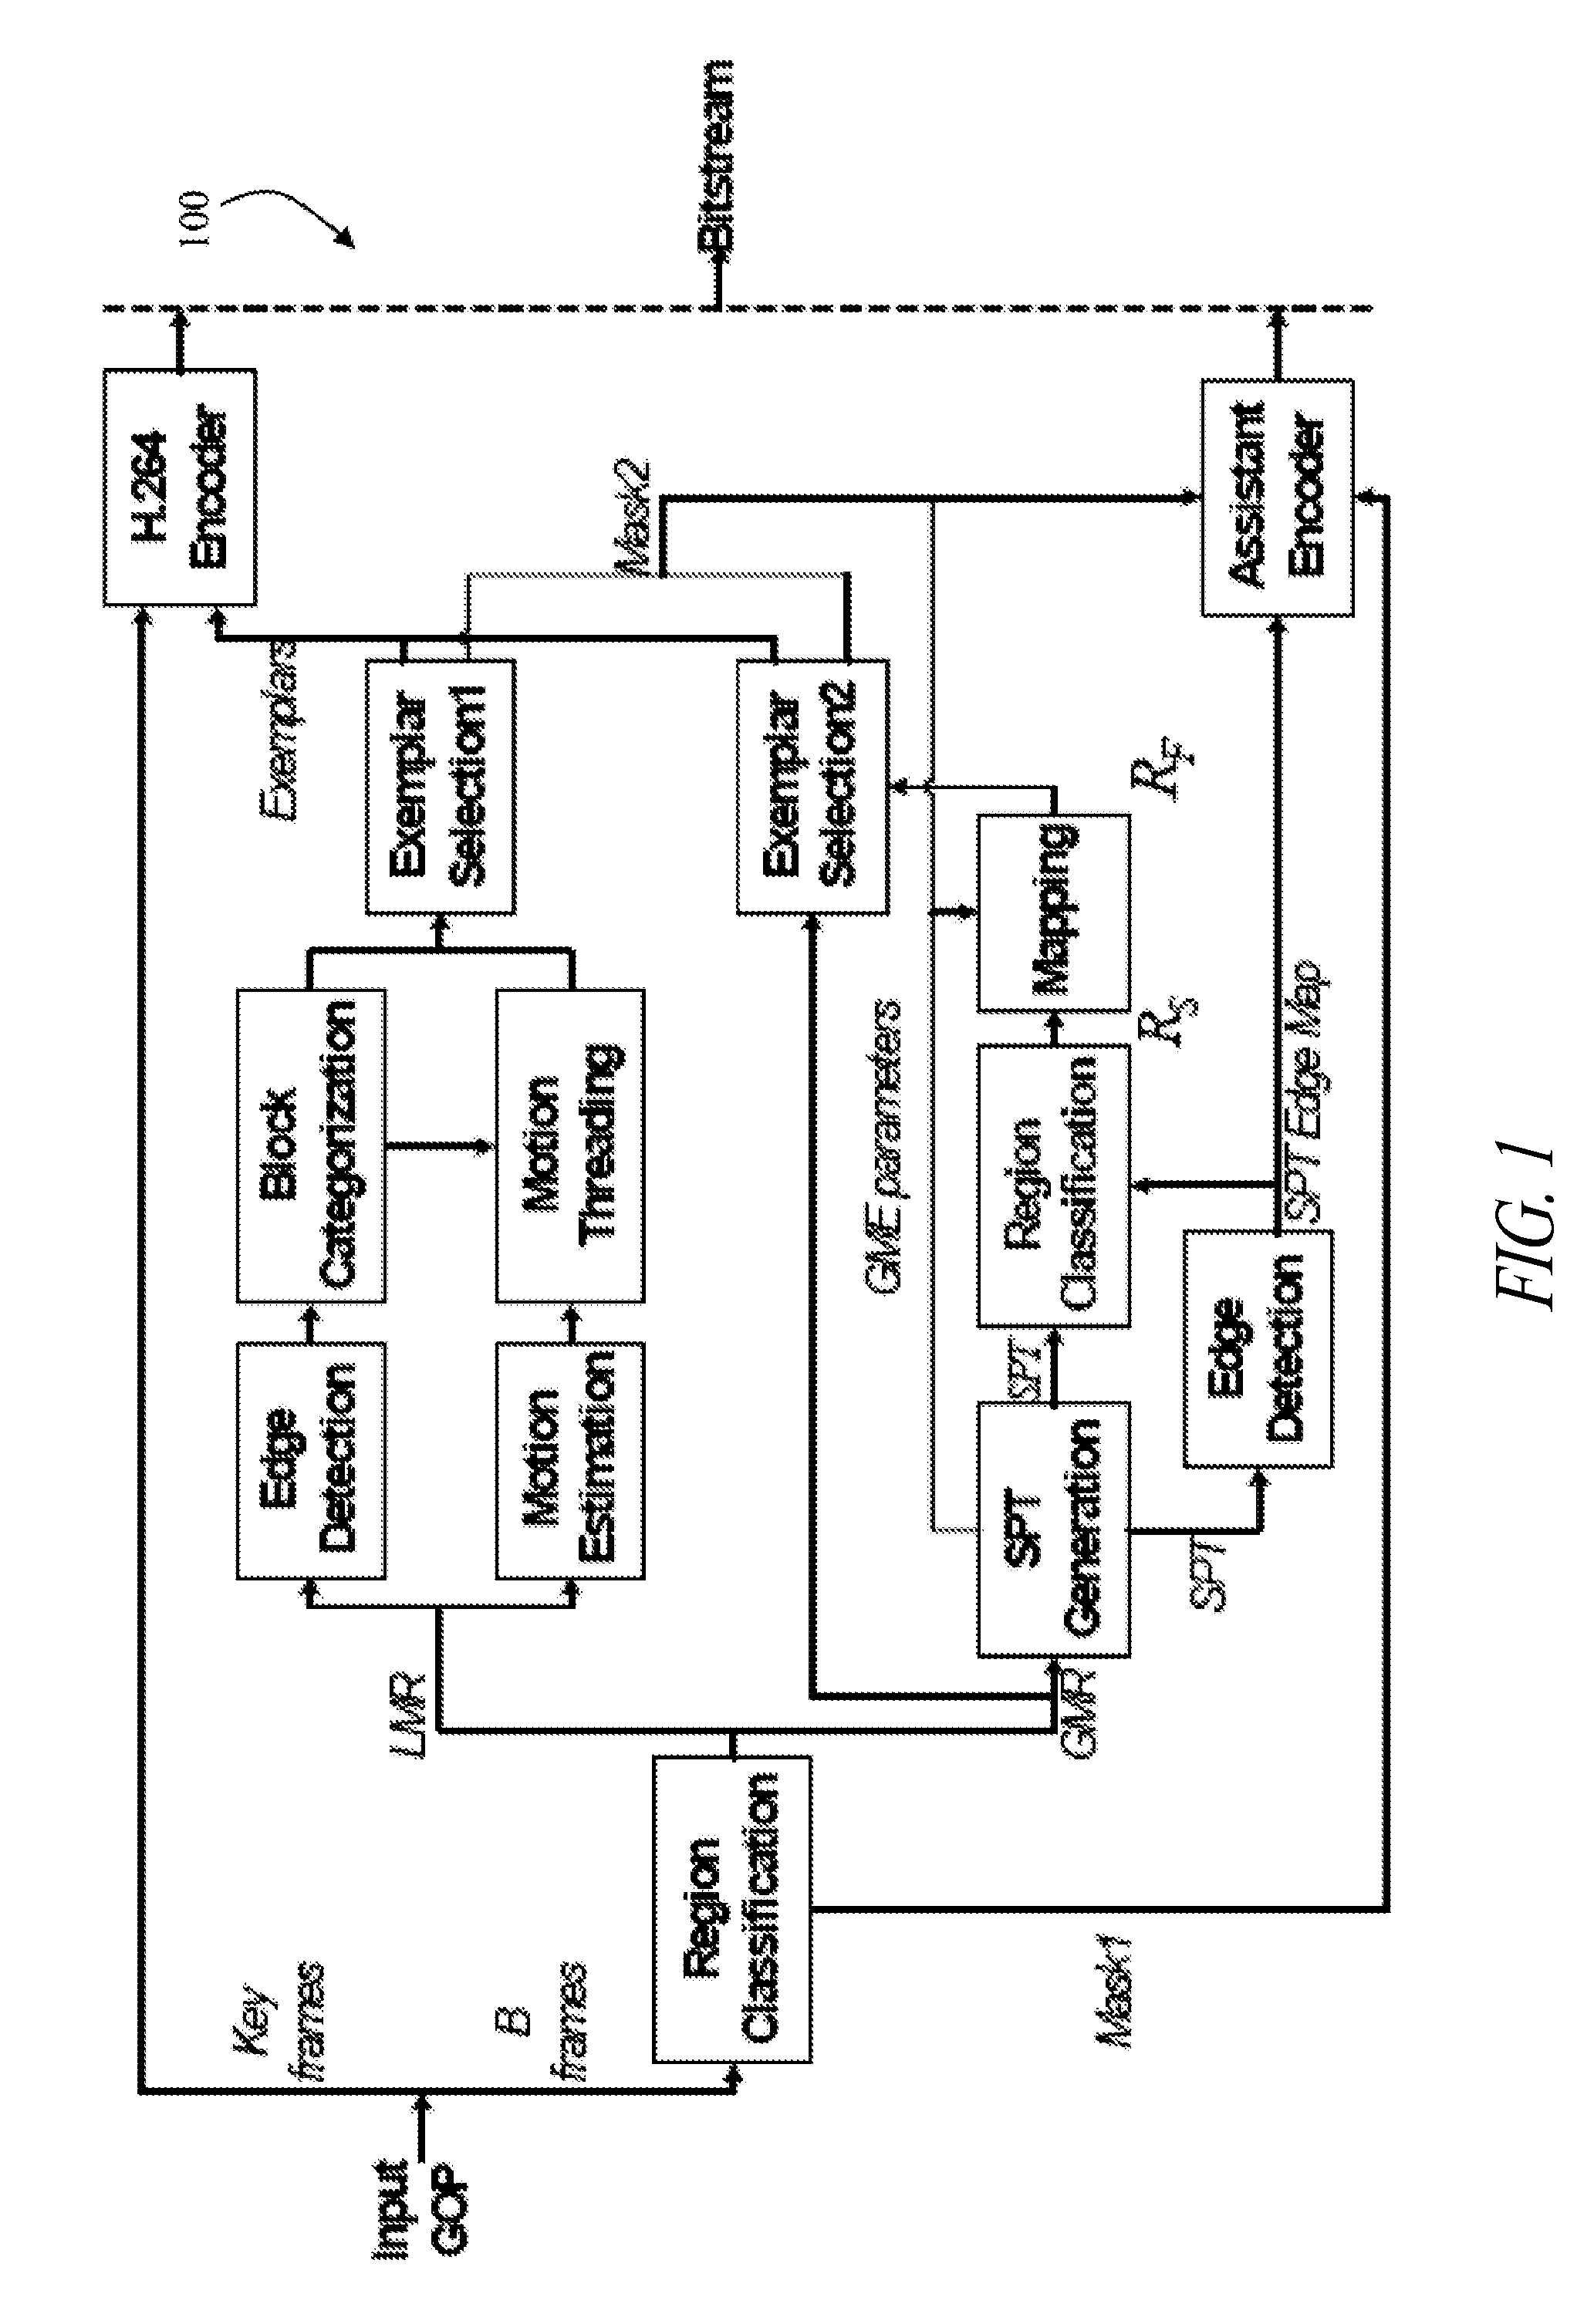 System and method for object based parametric video coding